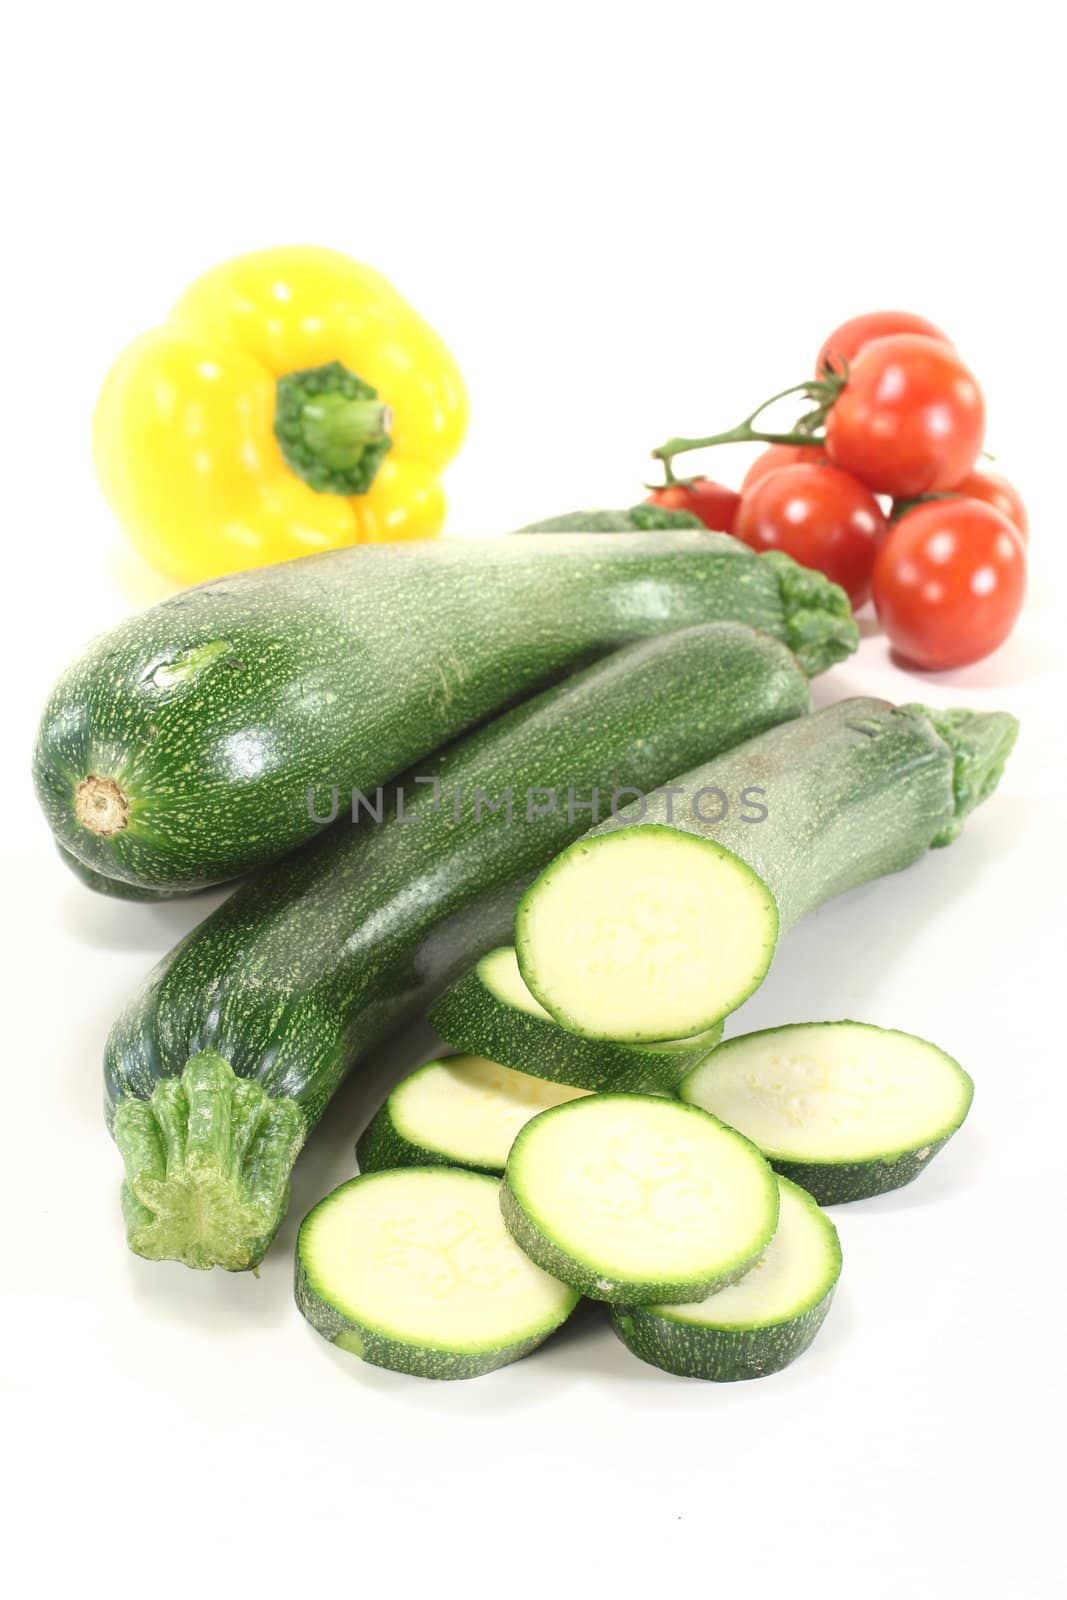 fresh zucchini with red tomatoes and bell pepper on a light background